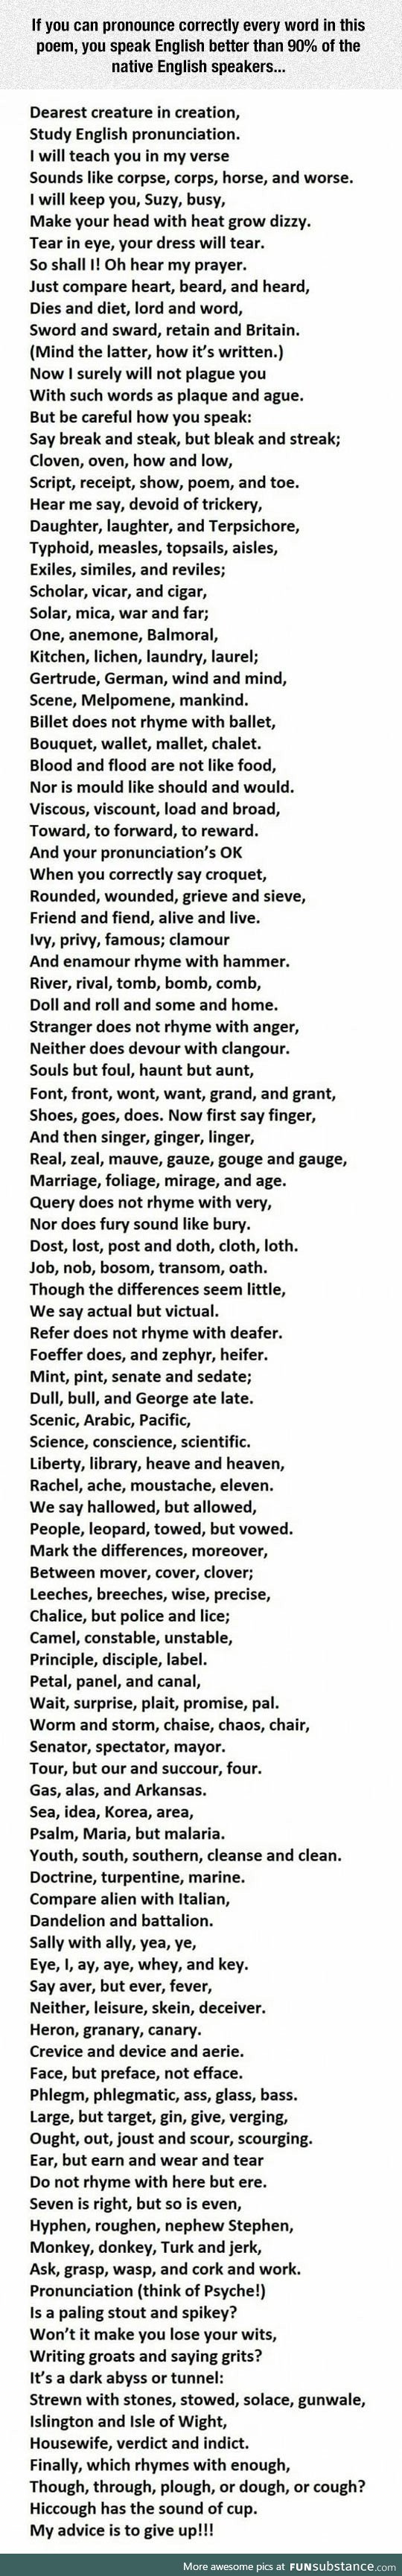 The most difficult english poem